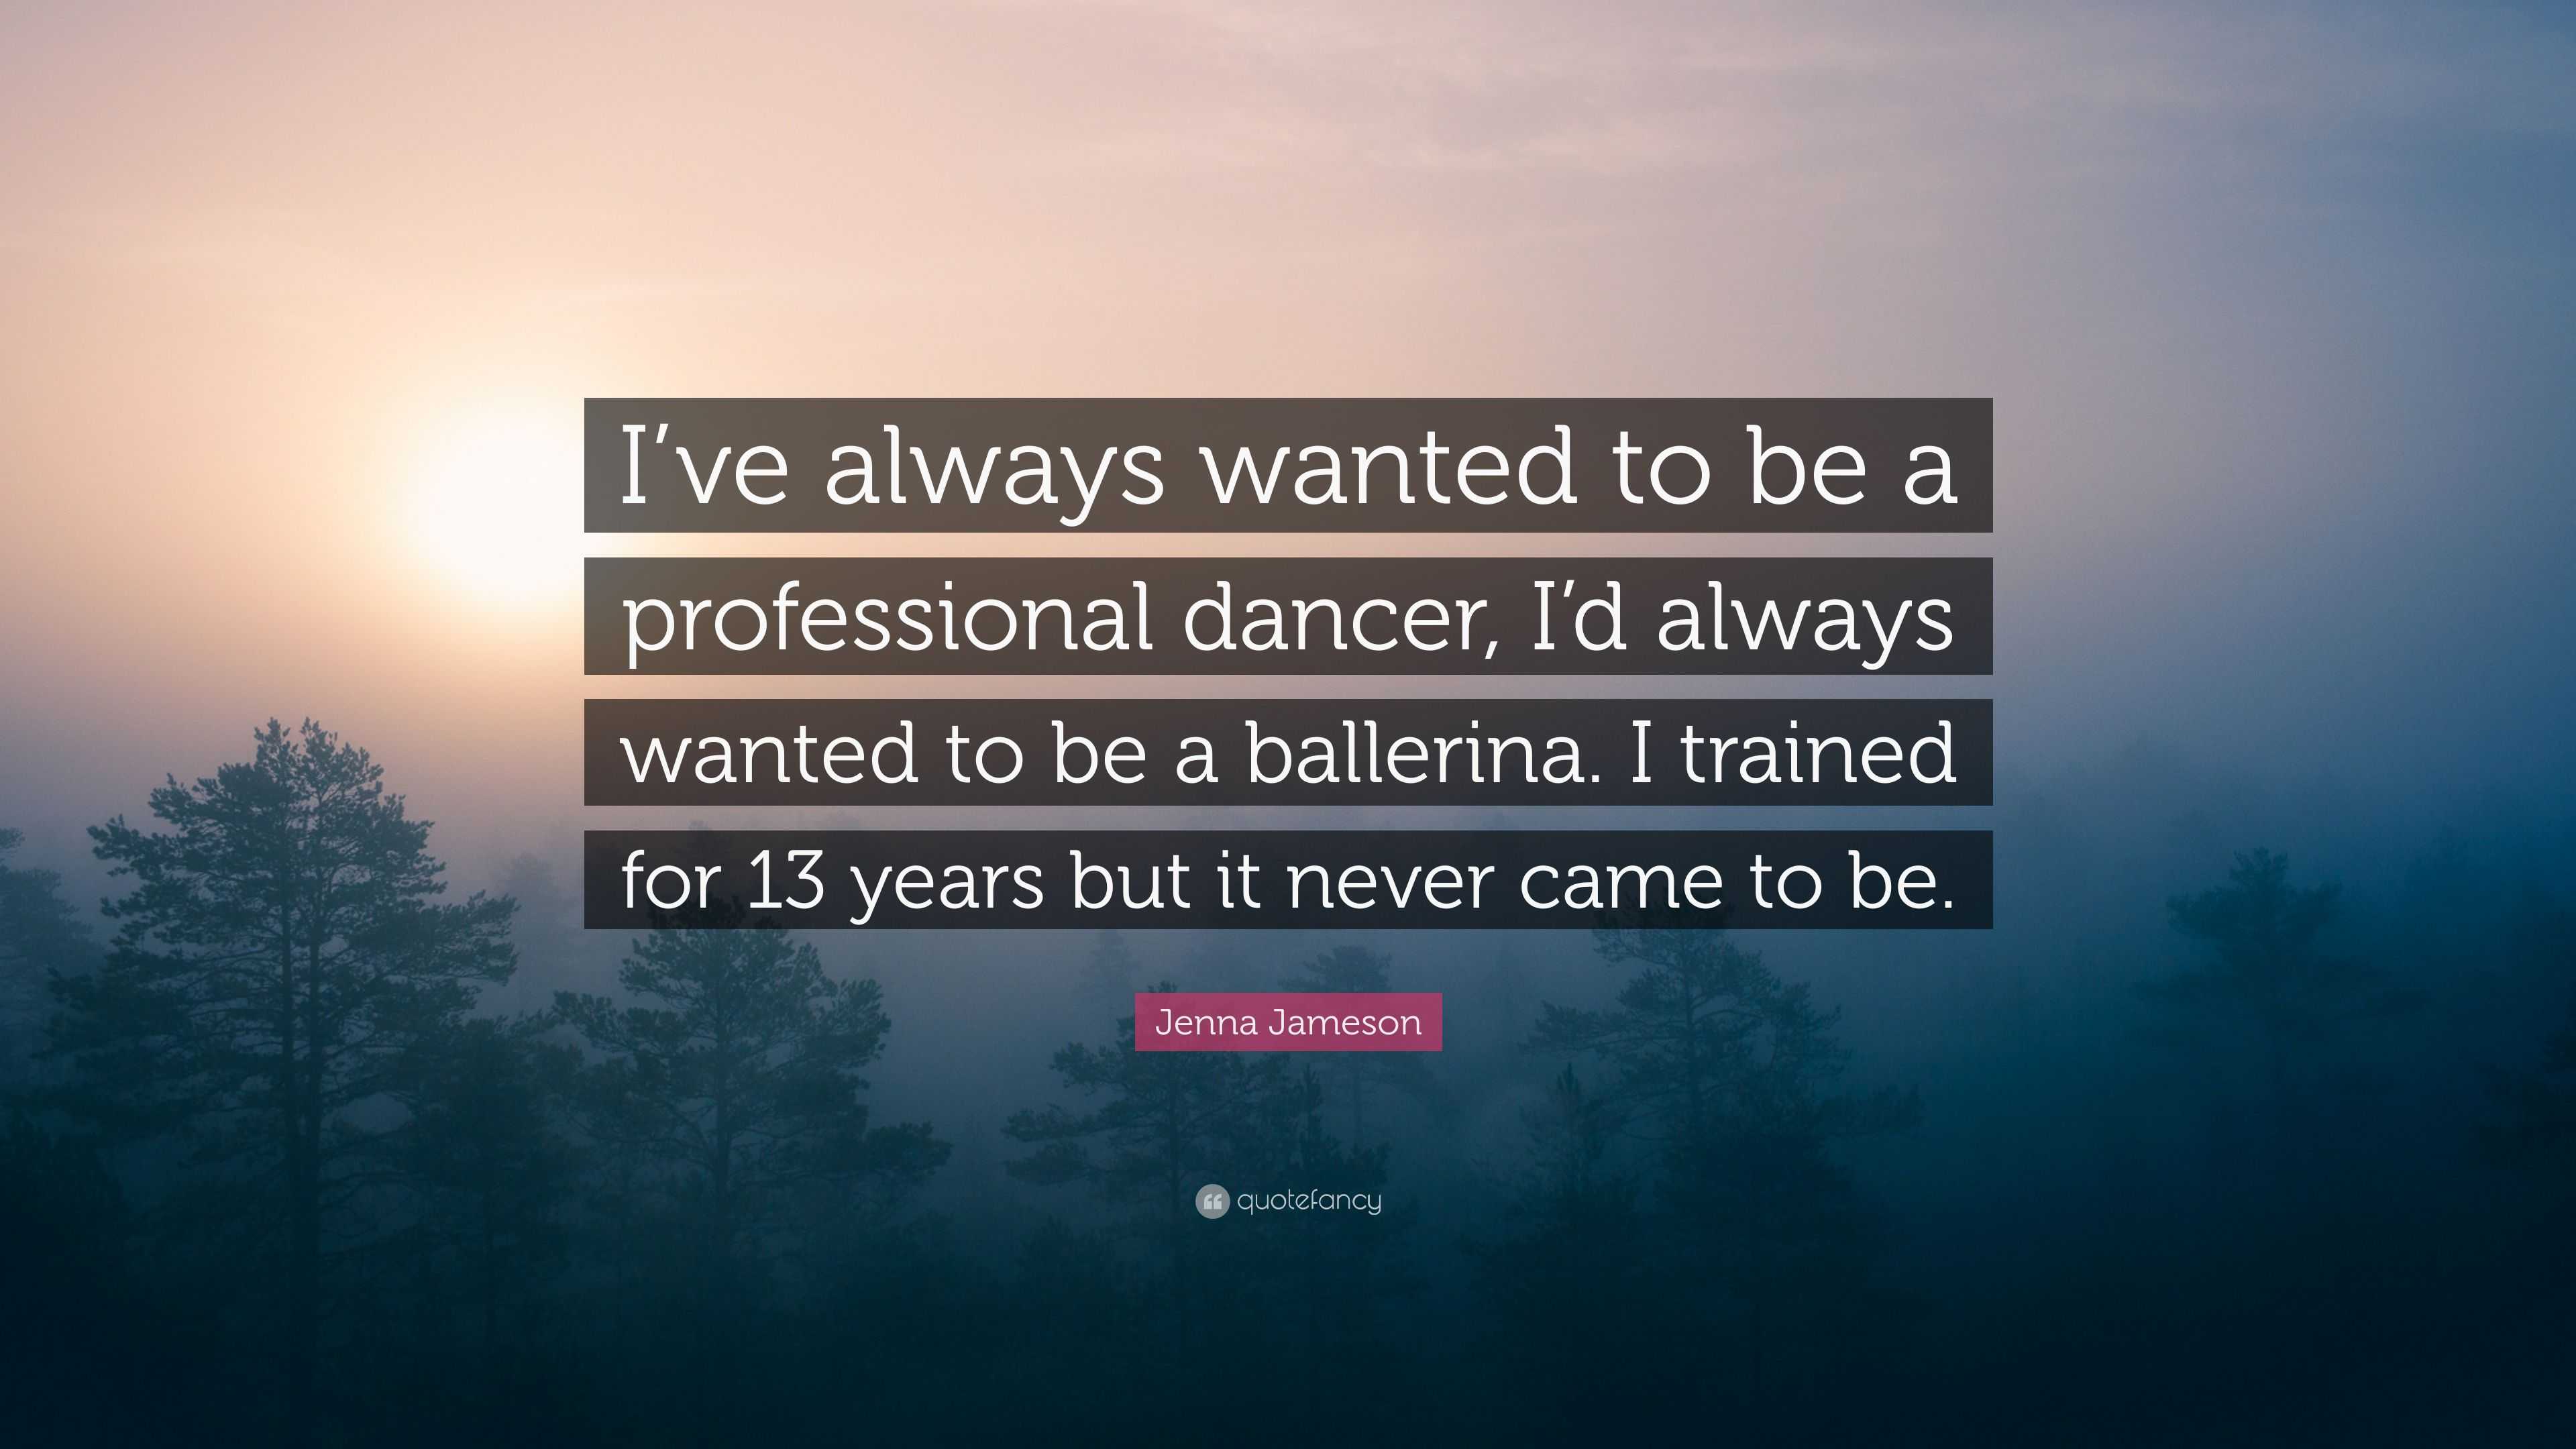 Jenna Jameson Quote: “I’ve always wanted to be a professional dancer, I